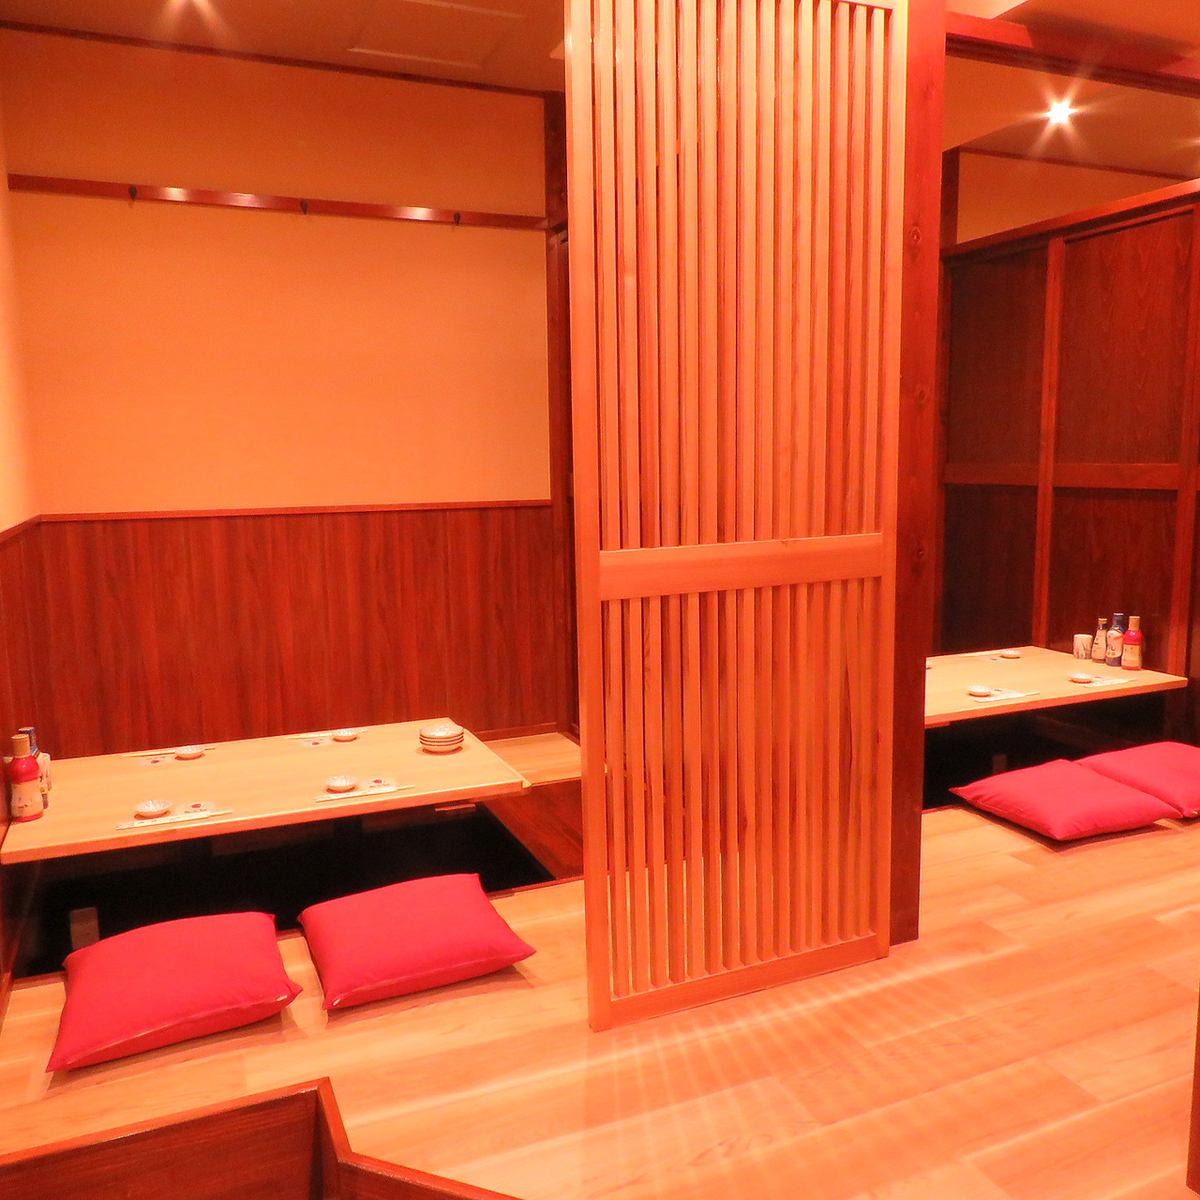 Enjoy a moment of conversation over a variety of local sake in a private room with a sunken kotatsu...